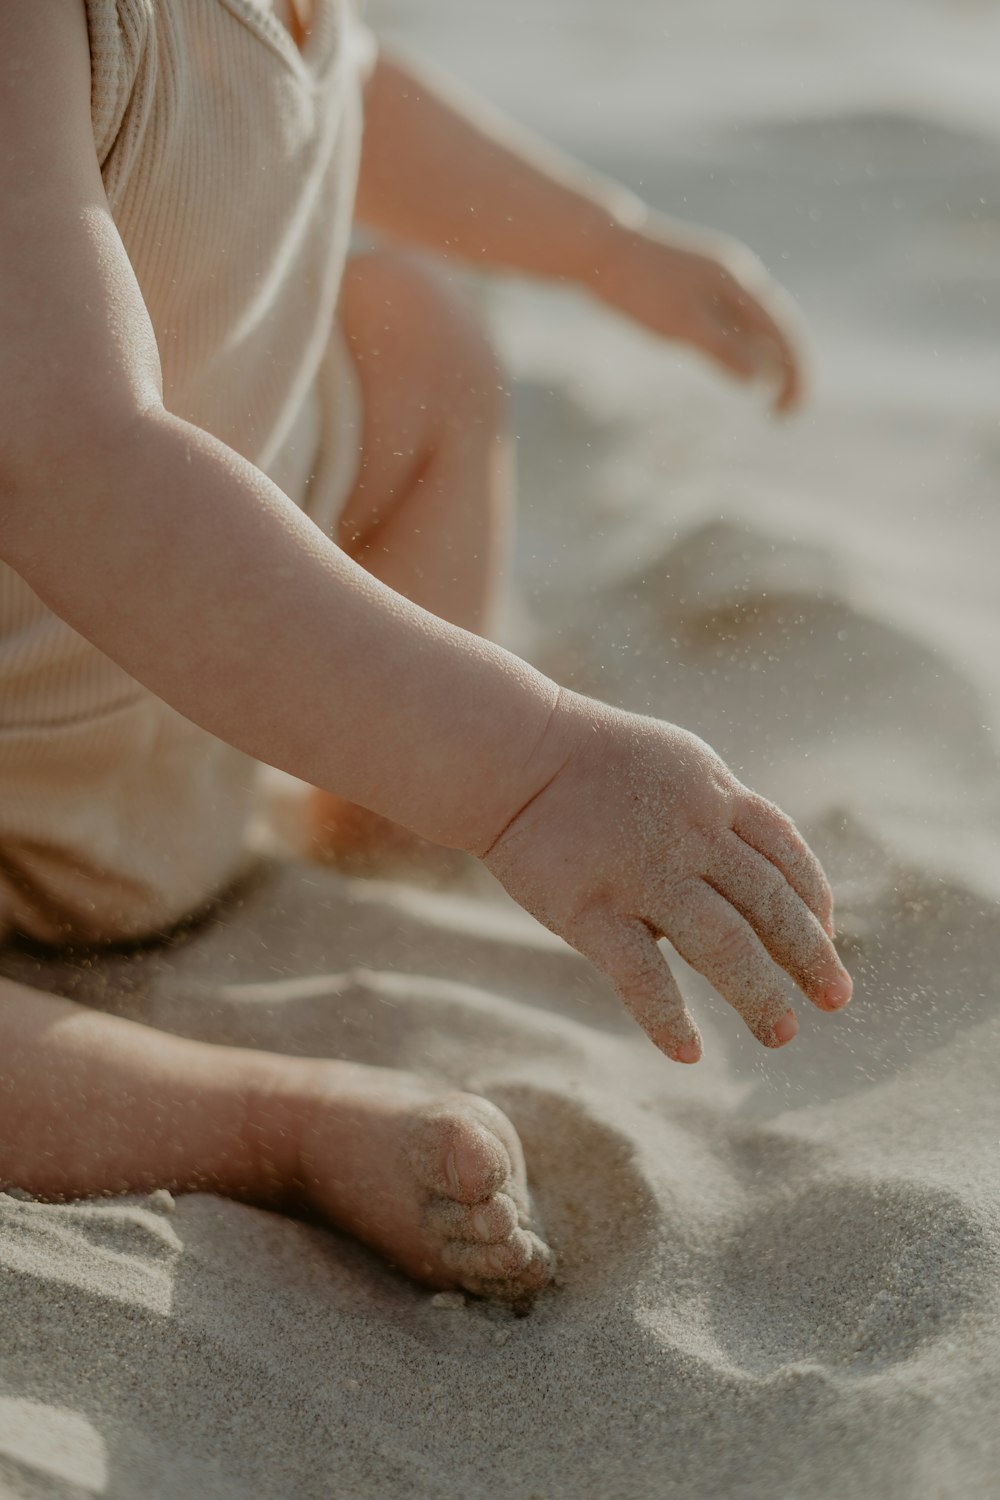 a baby sitting in the sand on the beach